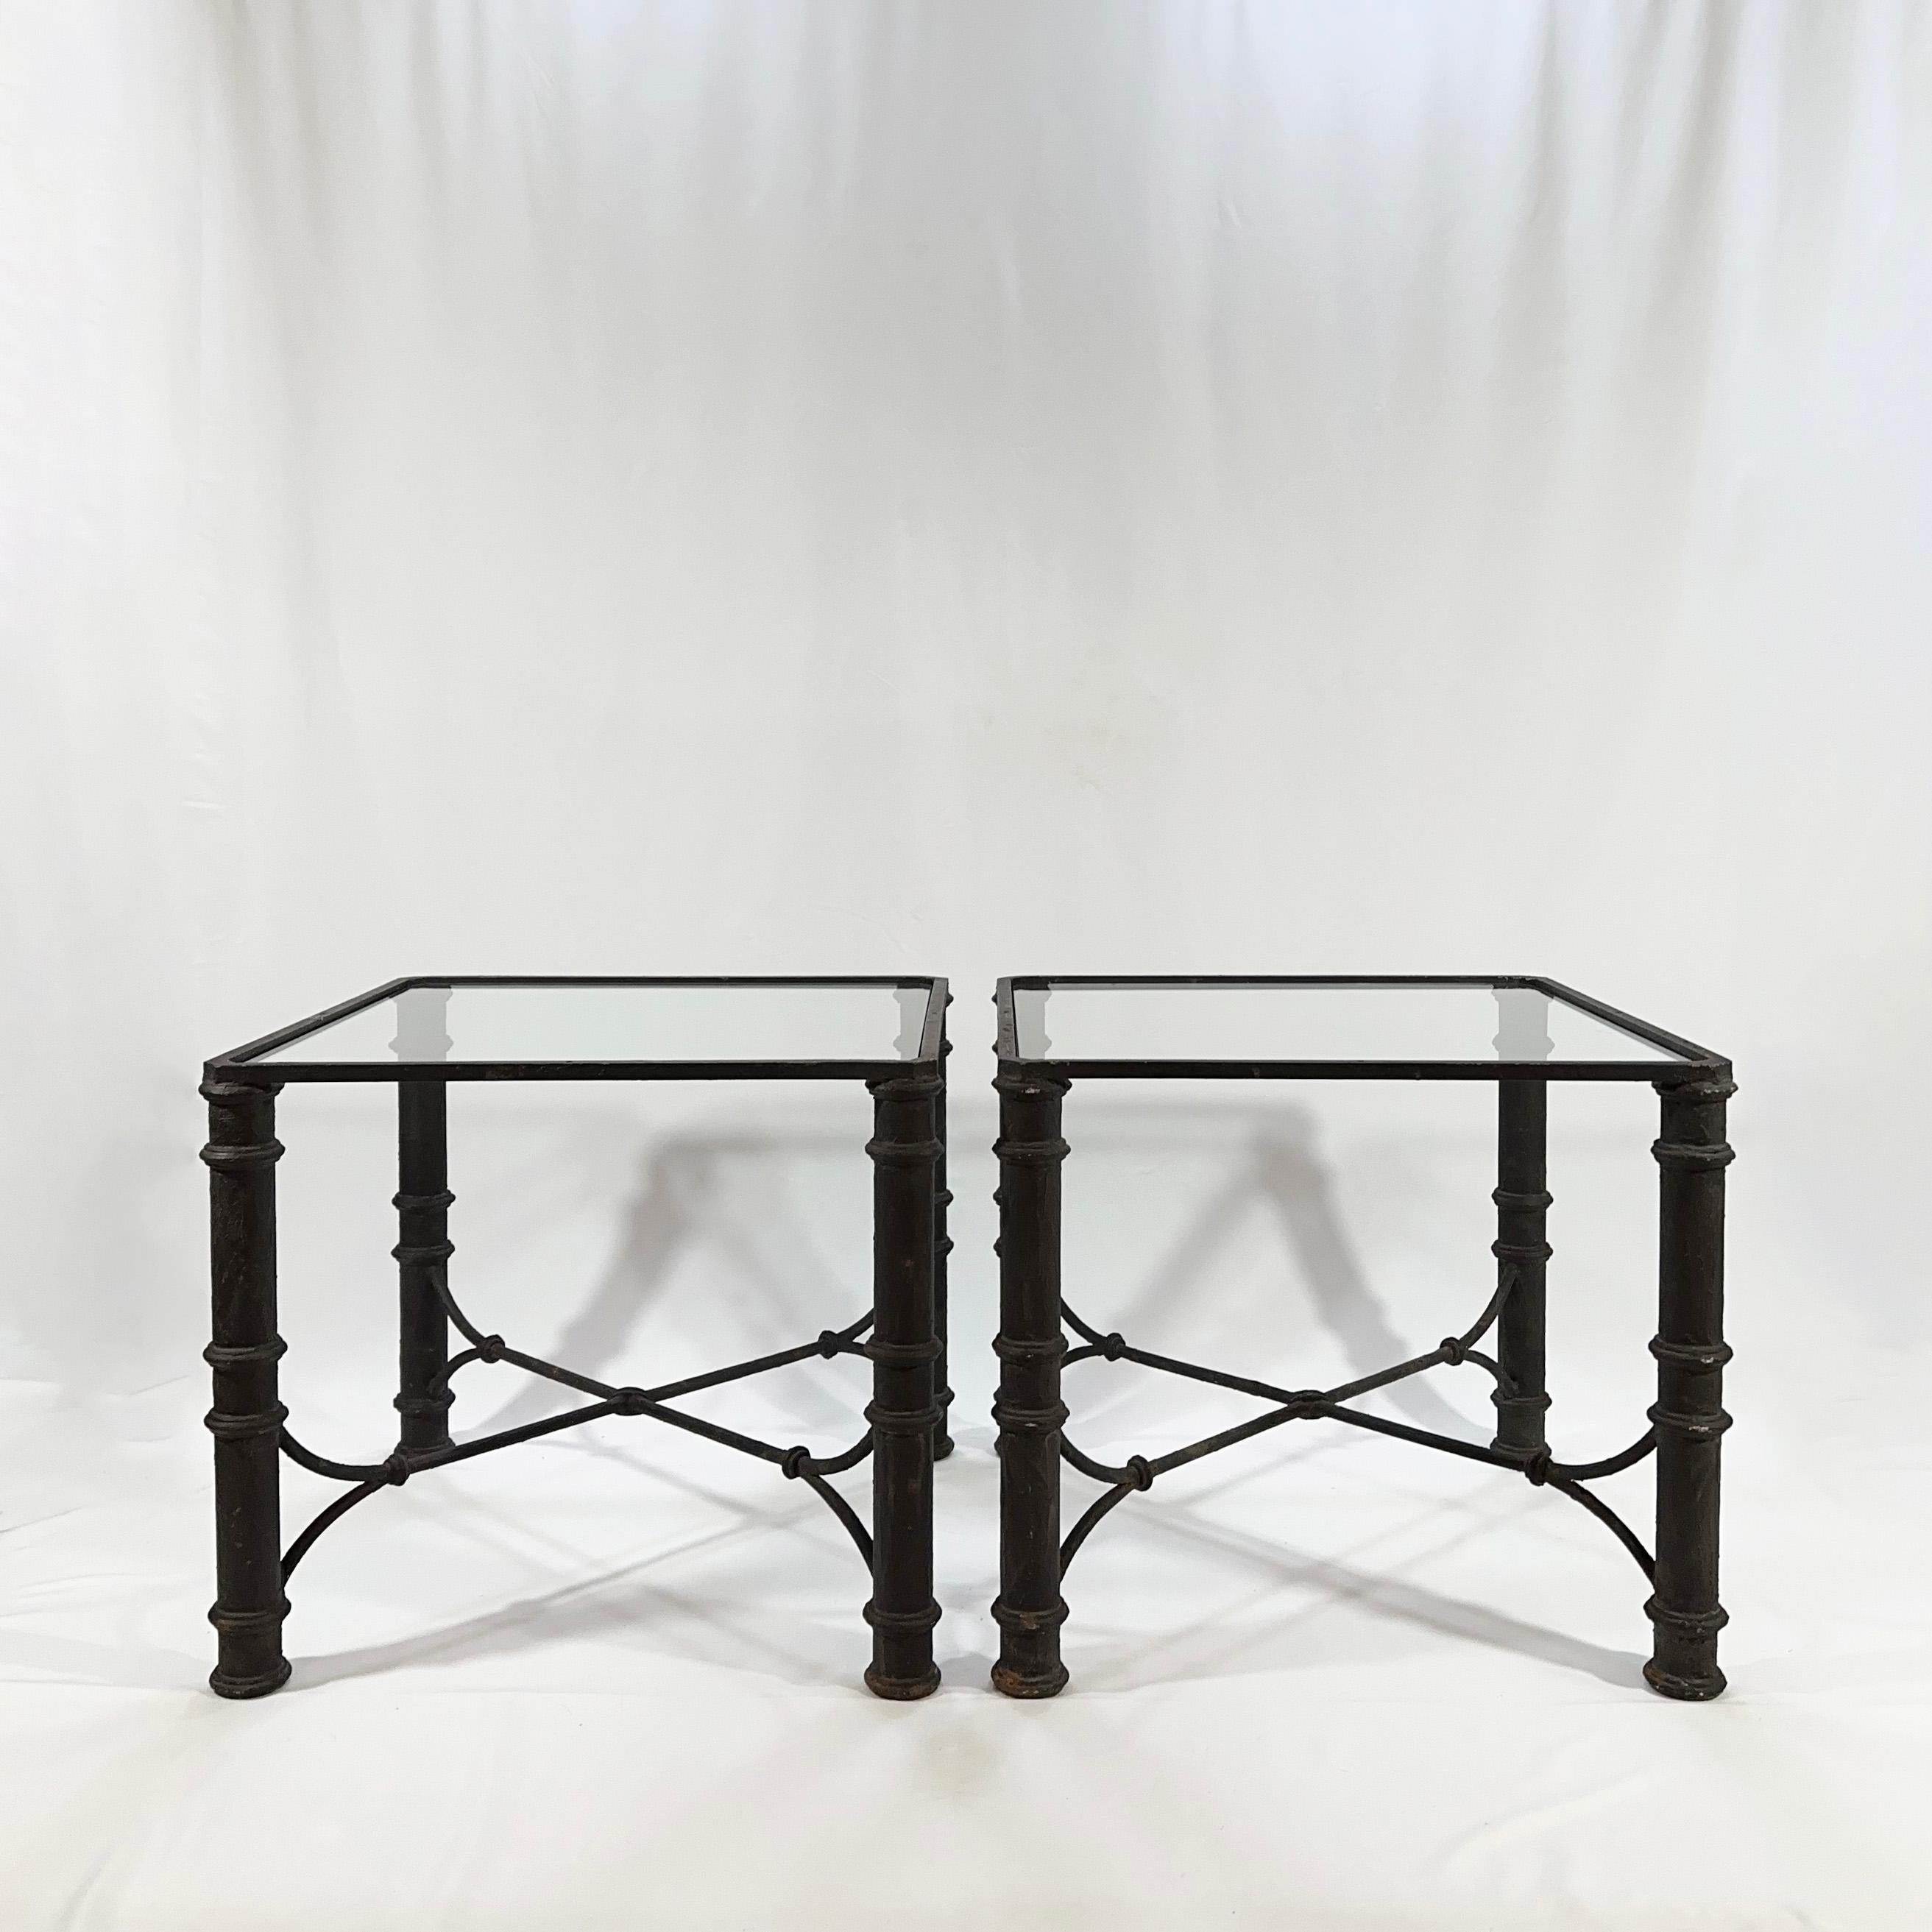 1980s, Brutalist, Black Cast Iron, Square Side Tables - Giacometti Style 1